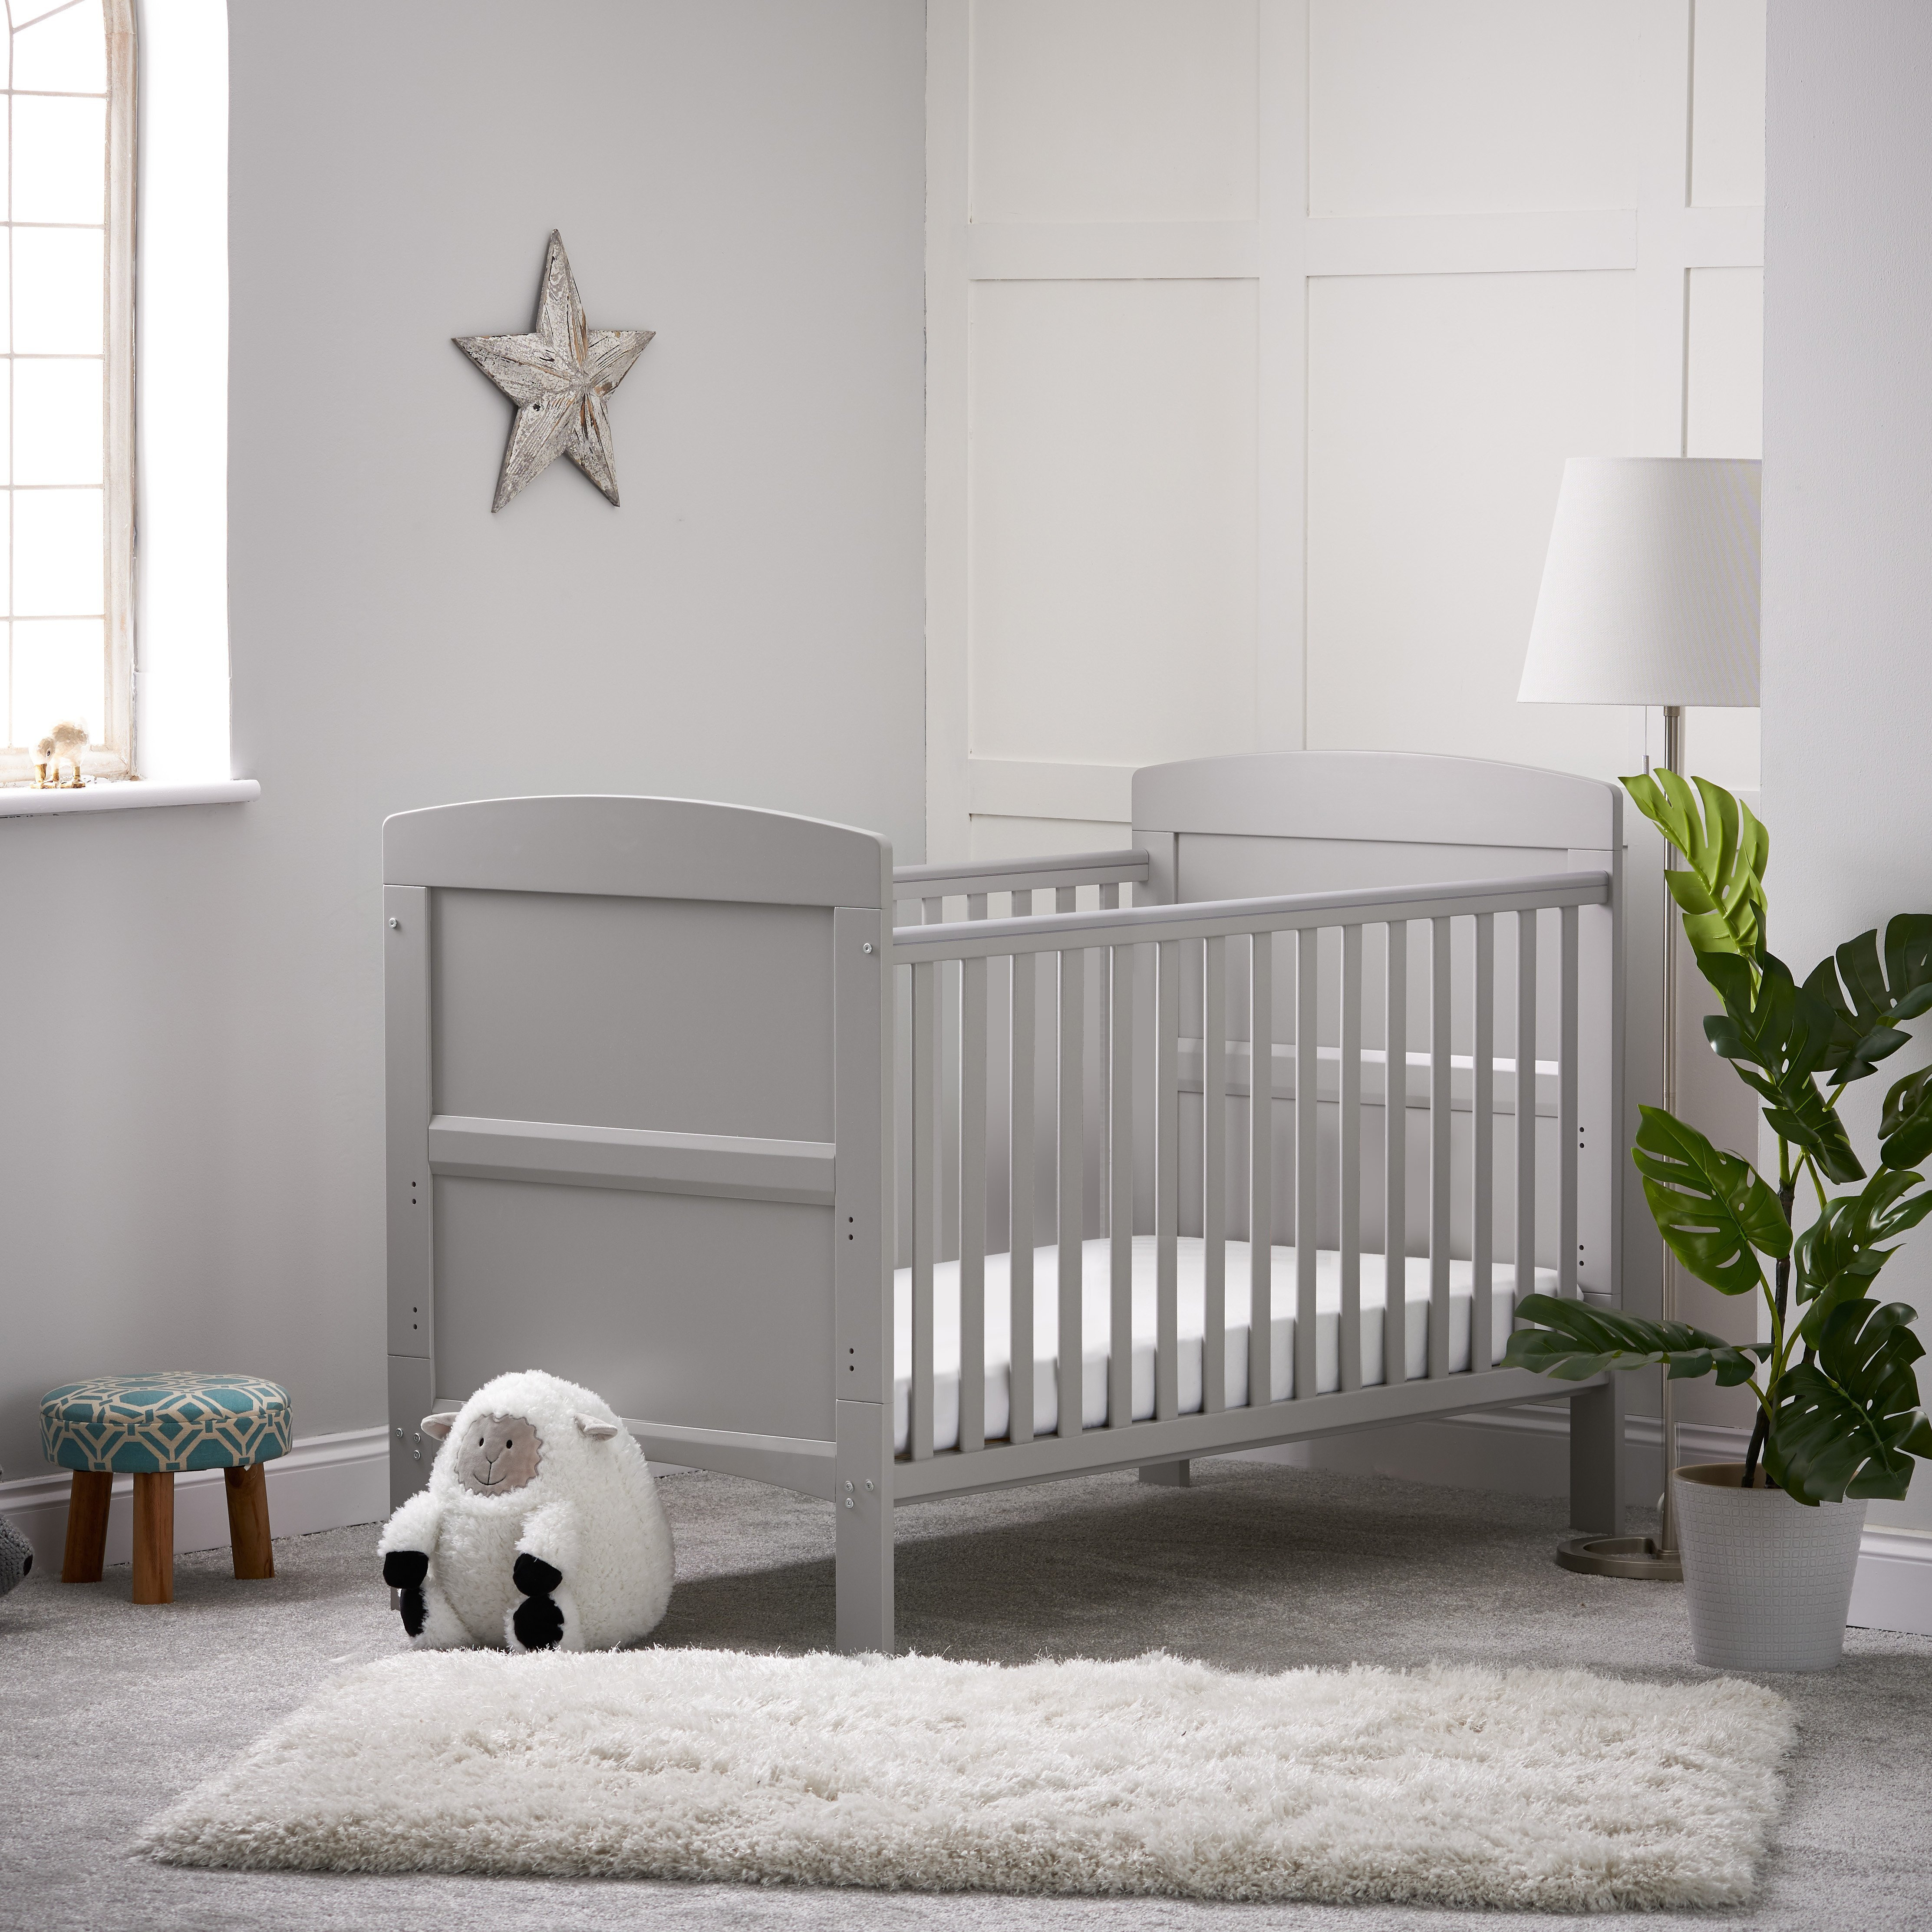 Obaby Grace Baby Cot Bed with Mattress - Warm Grey - image 1